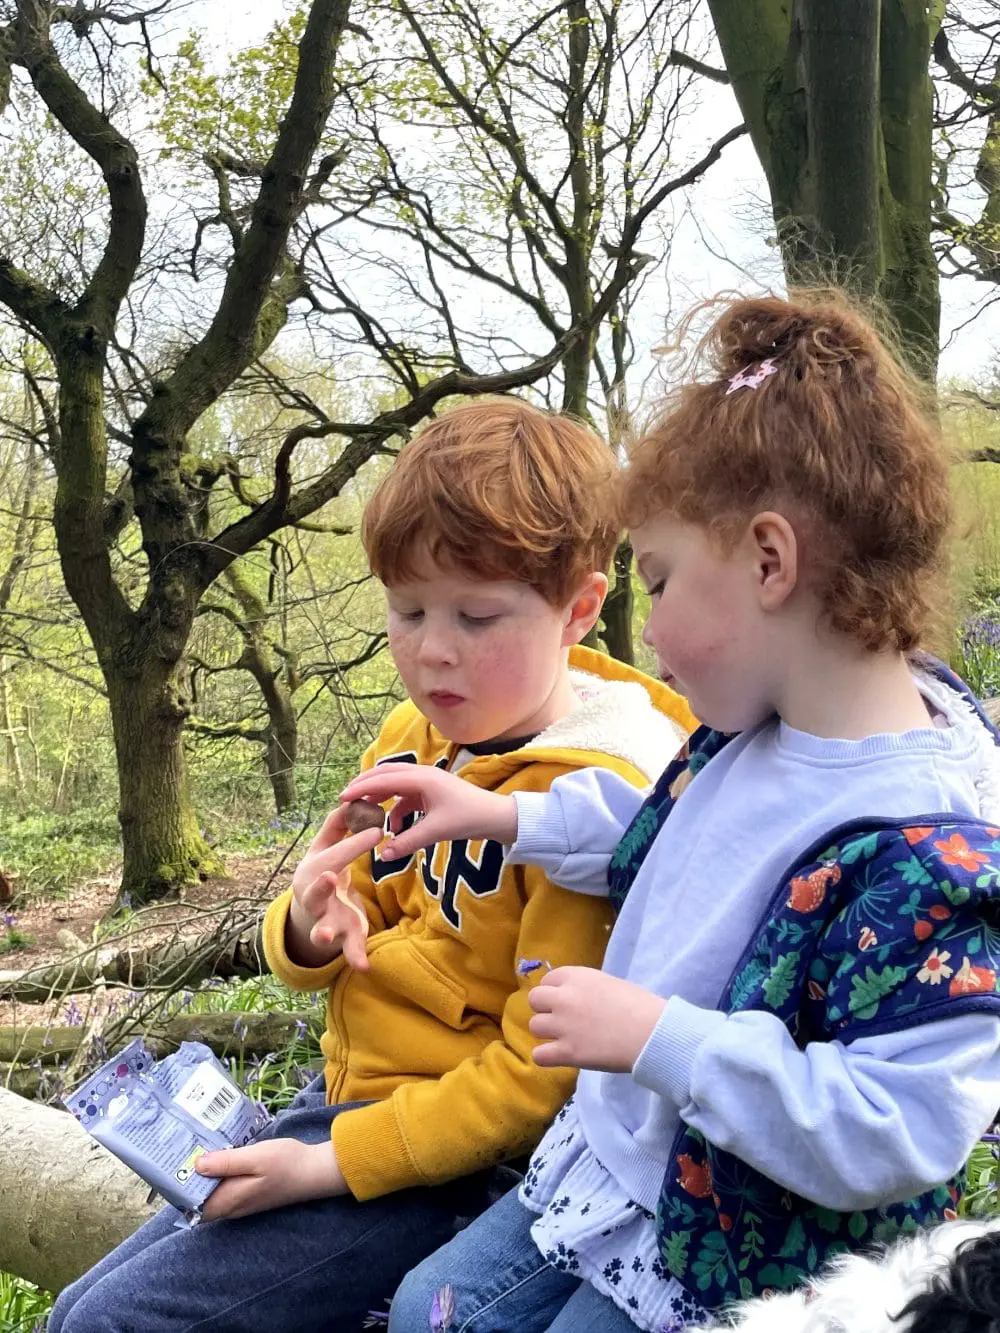 Sharing a snack pack of Yummycomb, Honeycomb covered in Belgian chocolate in the outdoors